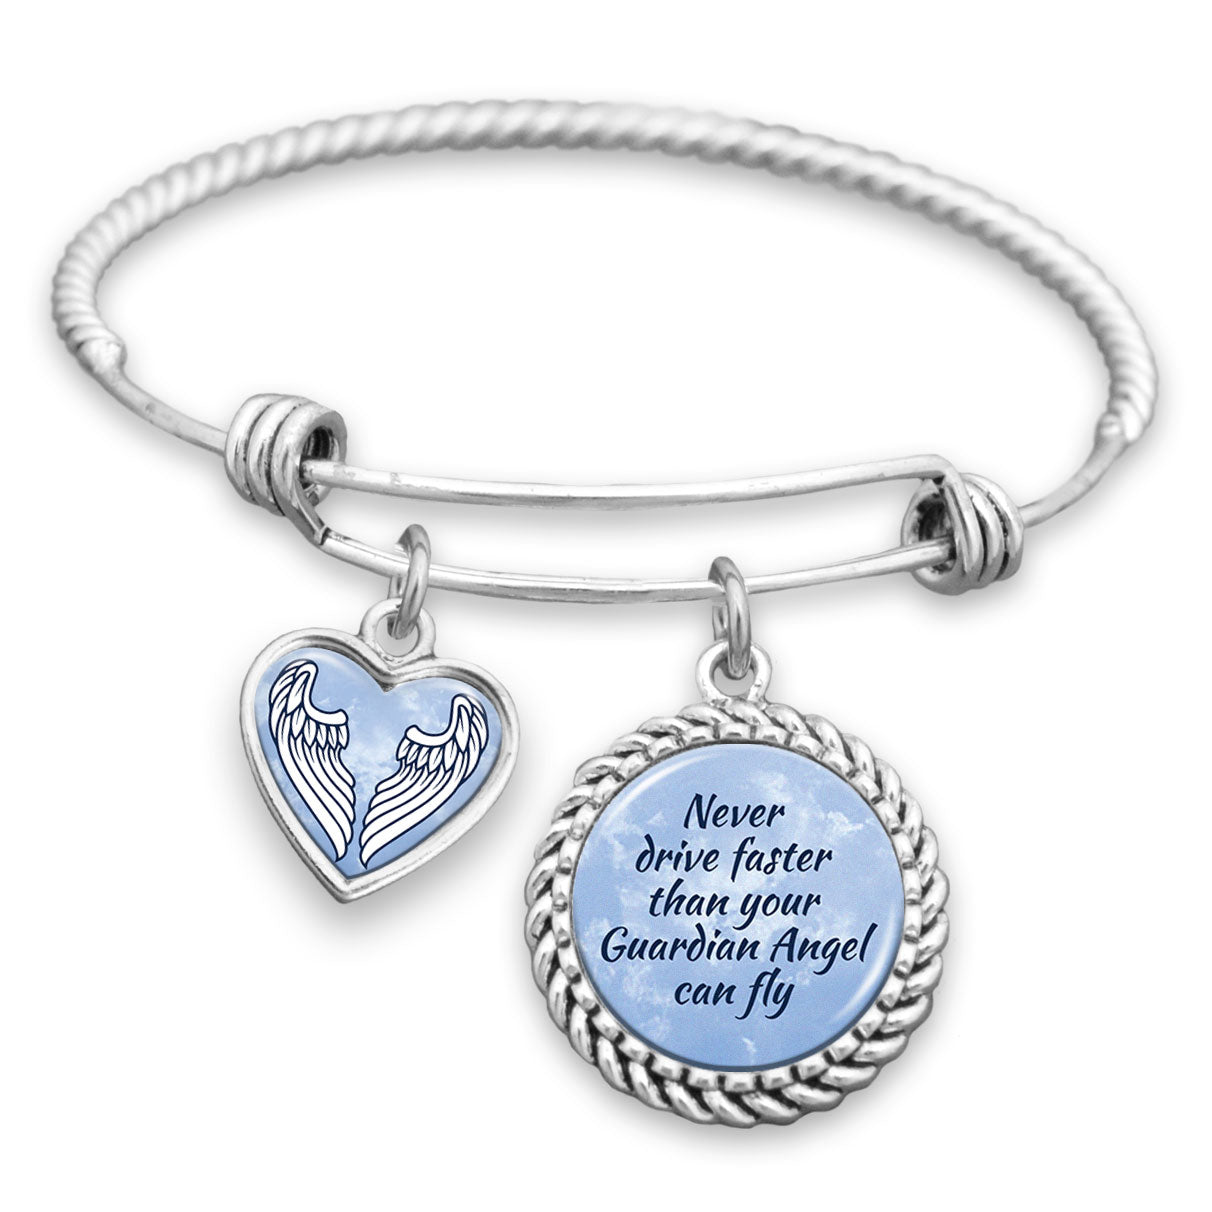 Never Drive Faster Than Your Guardian Angel Can Fly Charm Bracelet